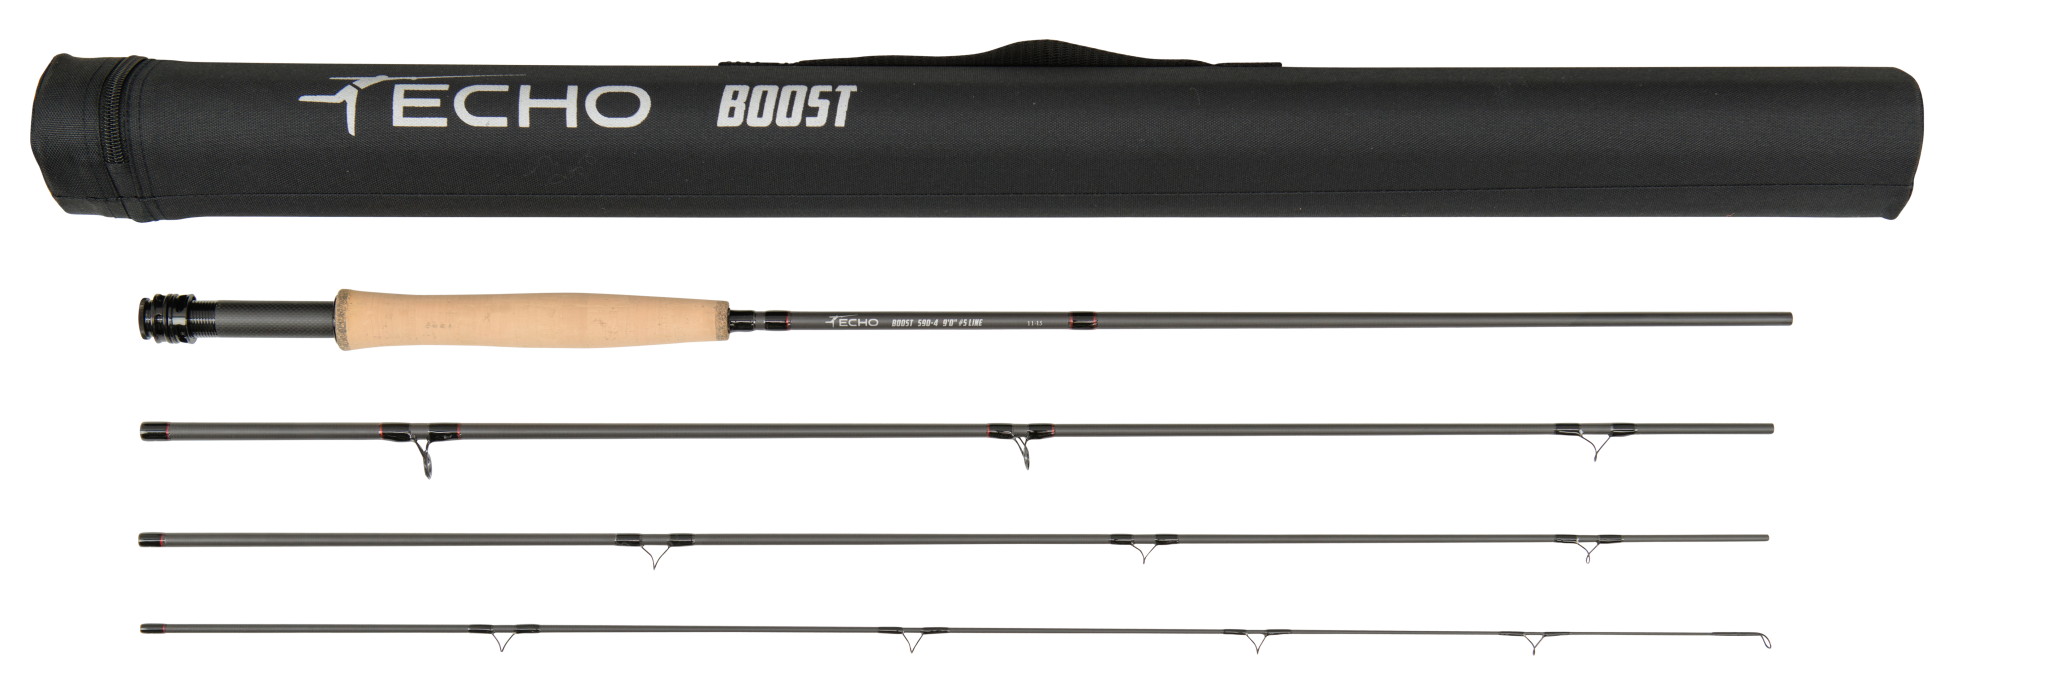 Echo BOOST 9'0" #5 Fly Rod - SALE - Lightweight, high-modulus graphite design with fast and crisp action. Perfect for challenging fishing situations. Available in fresh and saltwater models.